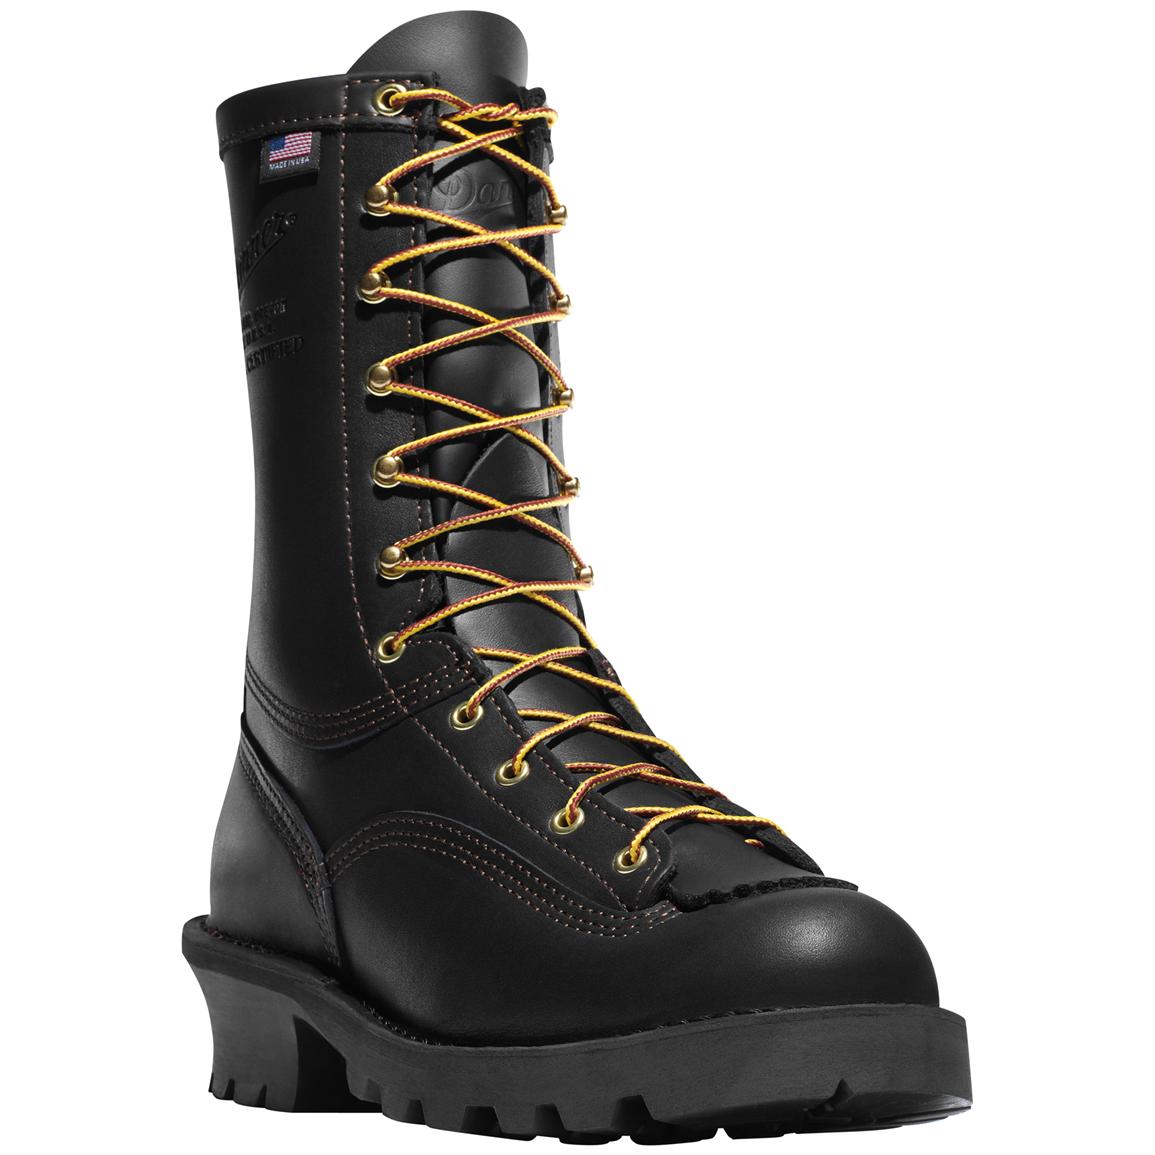 Danner® Flashpoint II All Leather Fire Work Boots, Black - 581778, Work